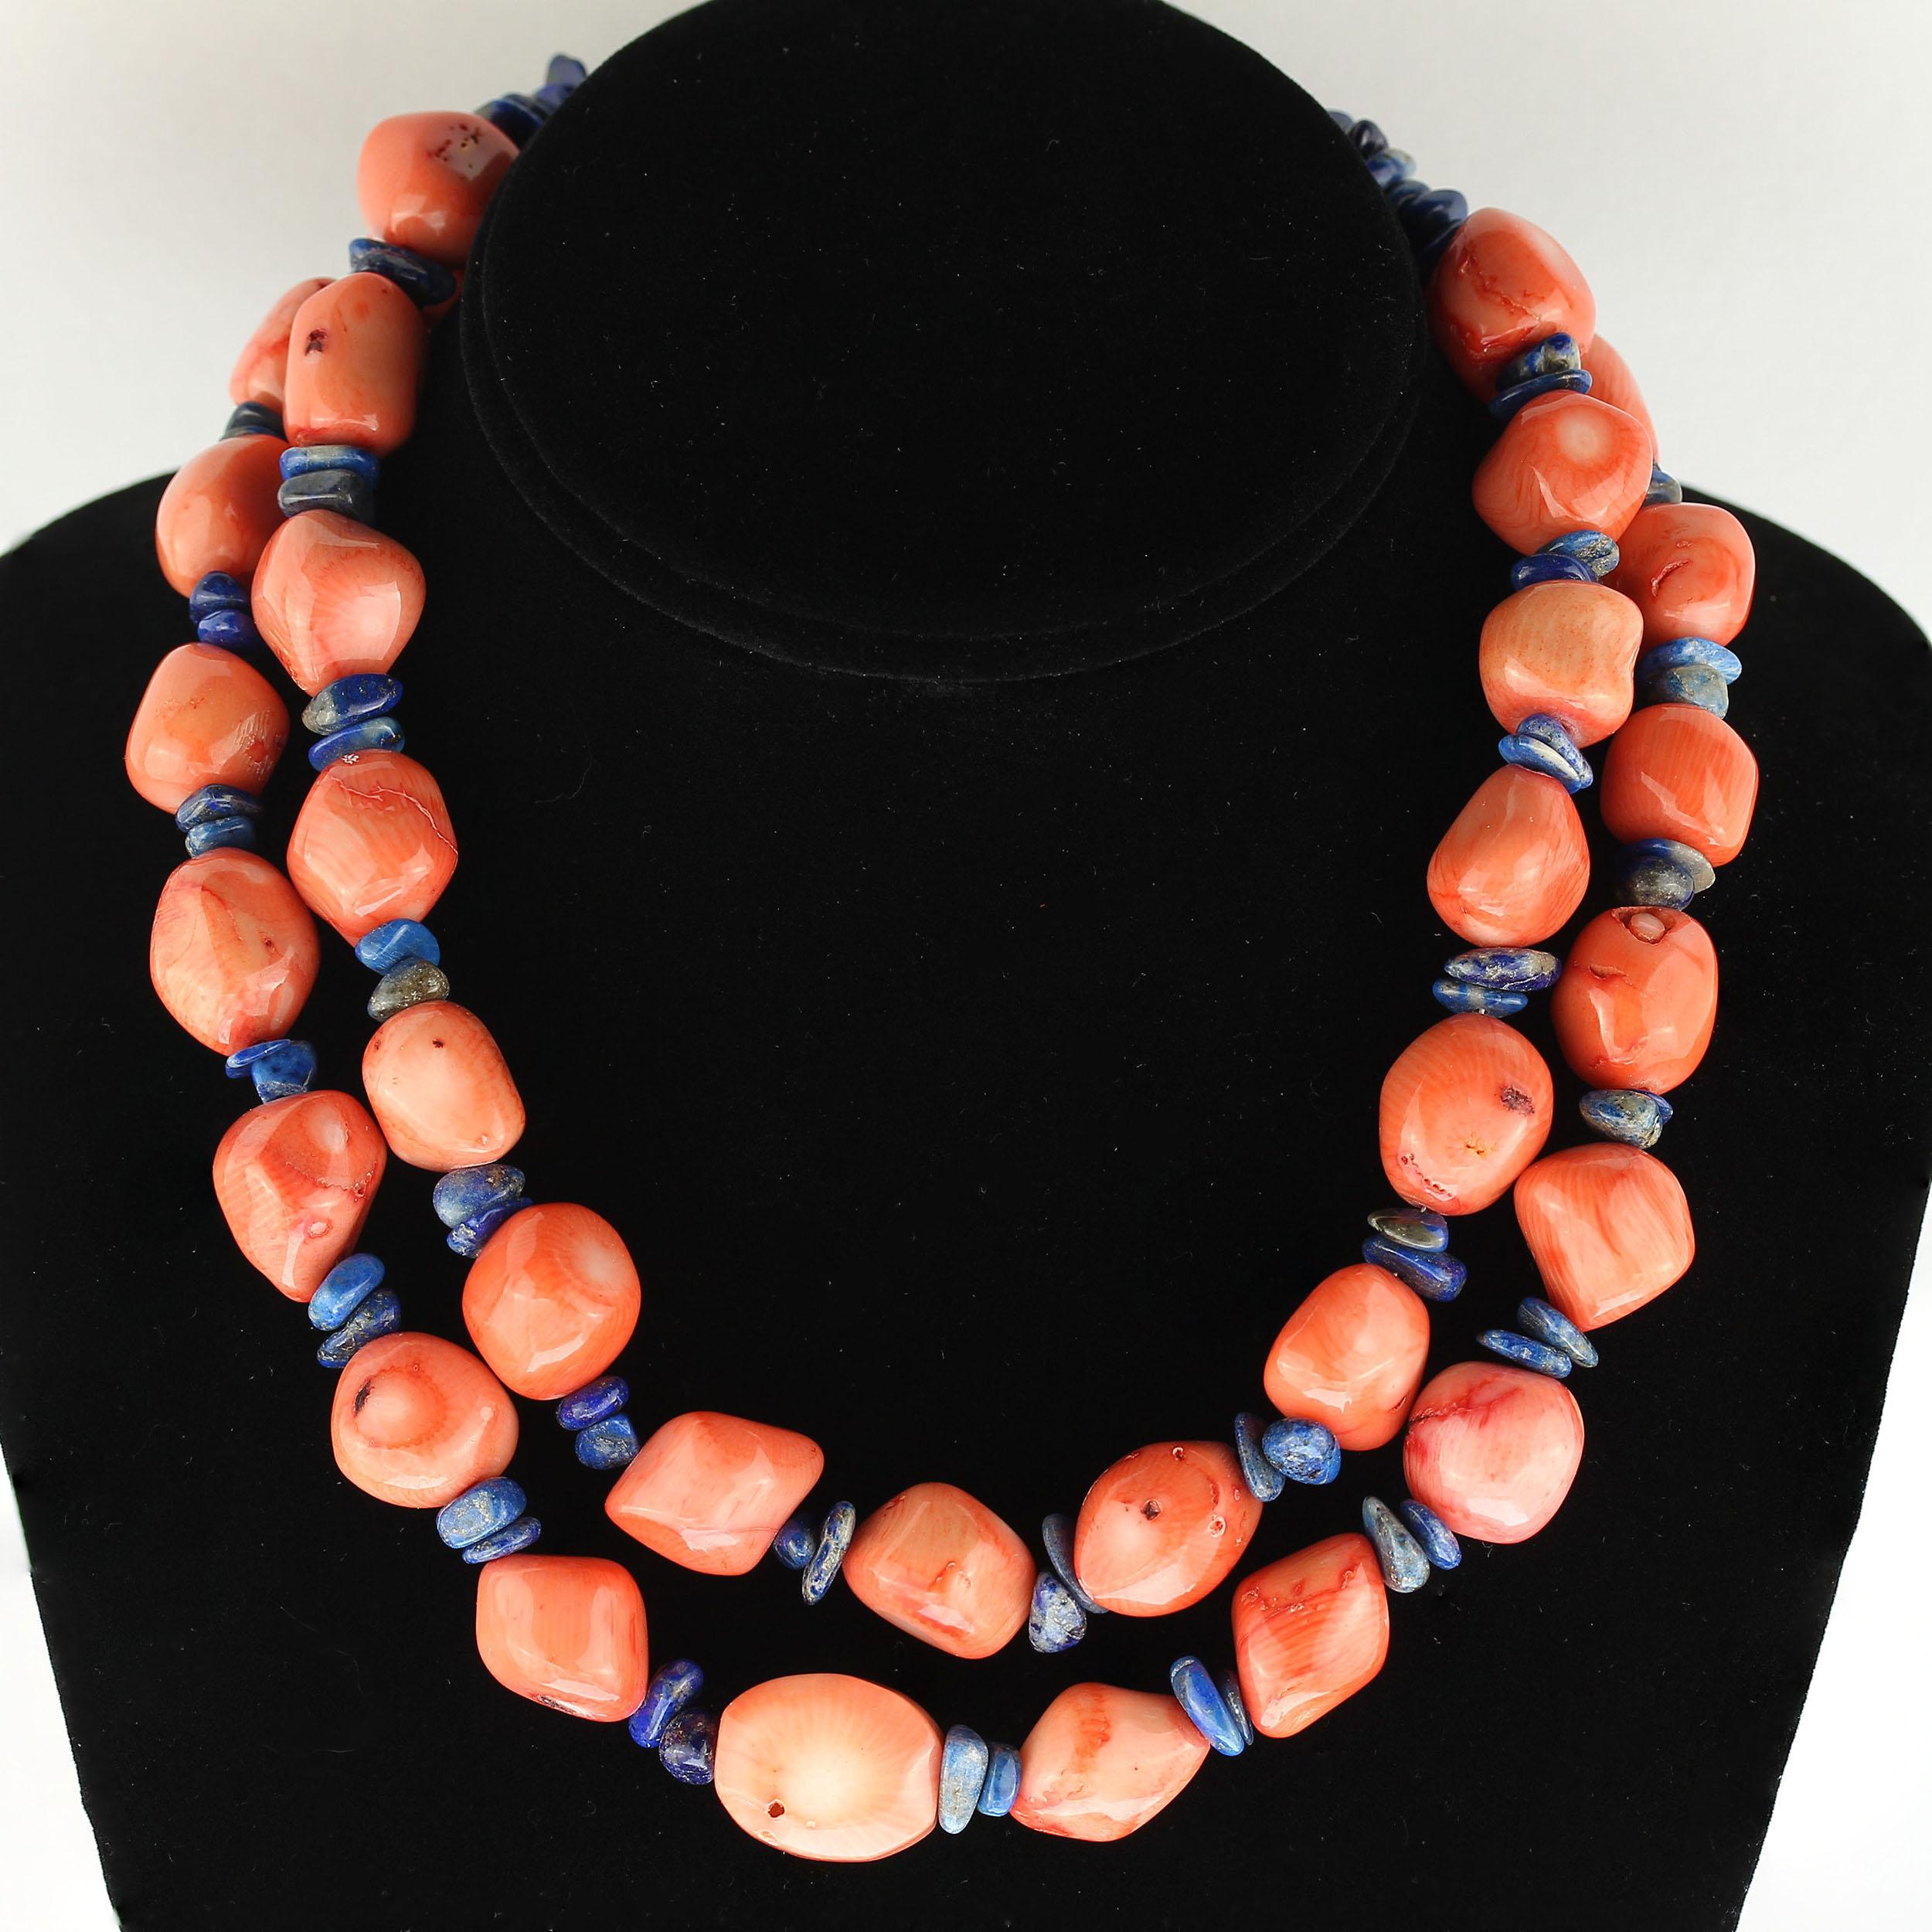 Bead AJD Double Strand Necklace of Peach Coral and Lapis Lazuli